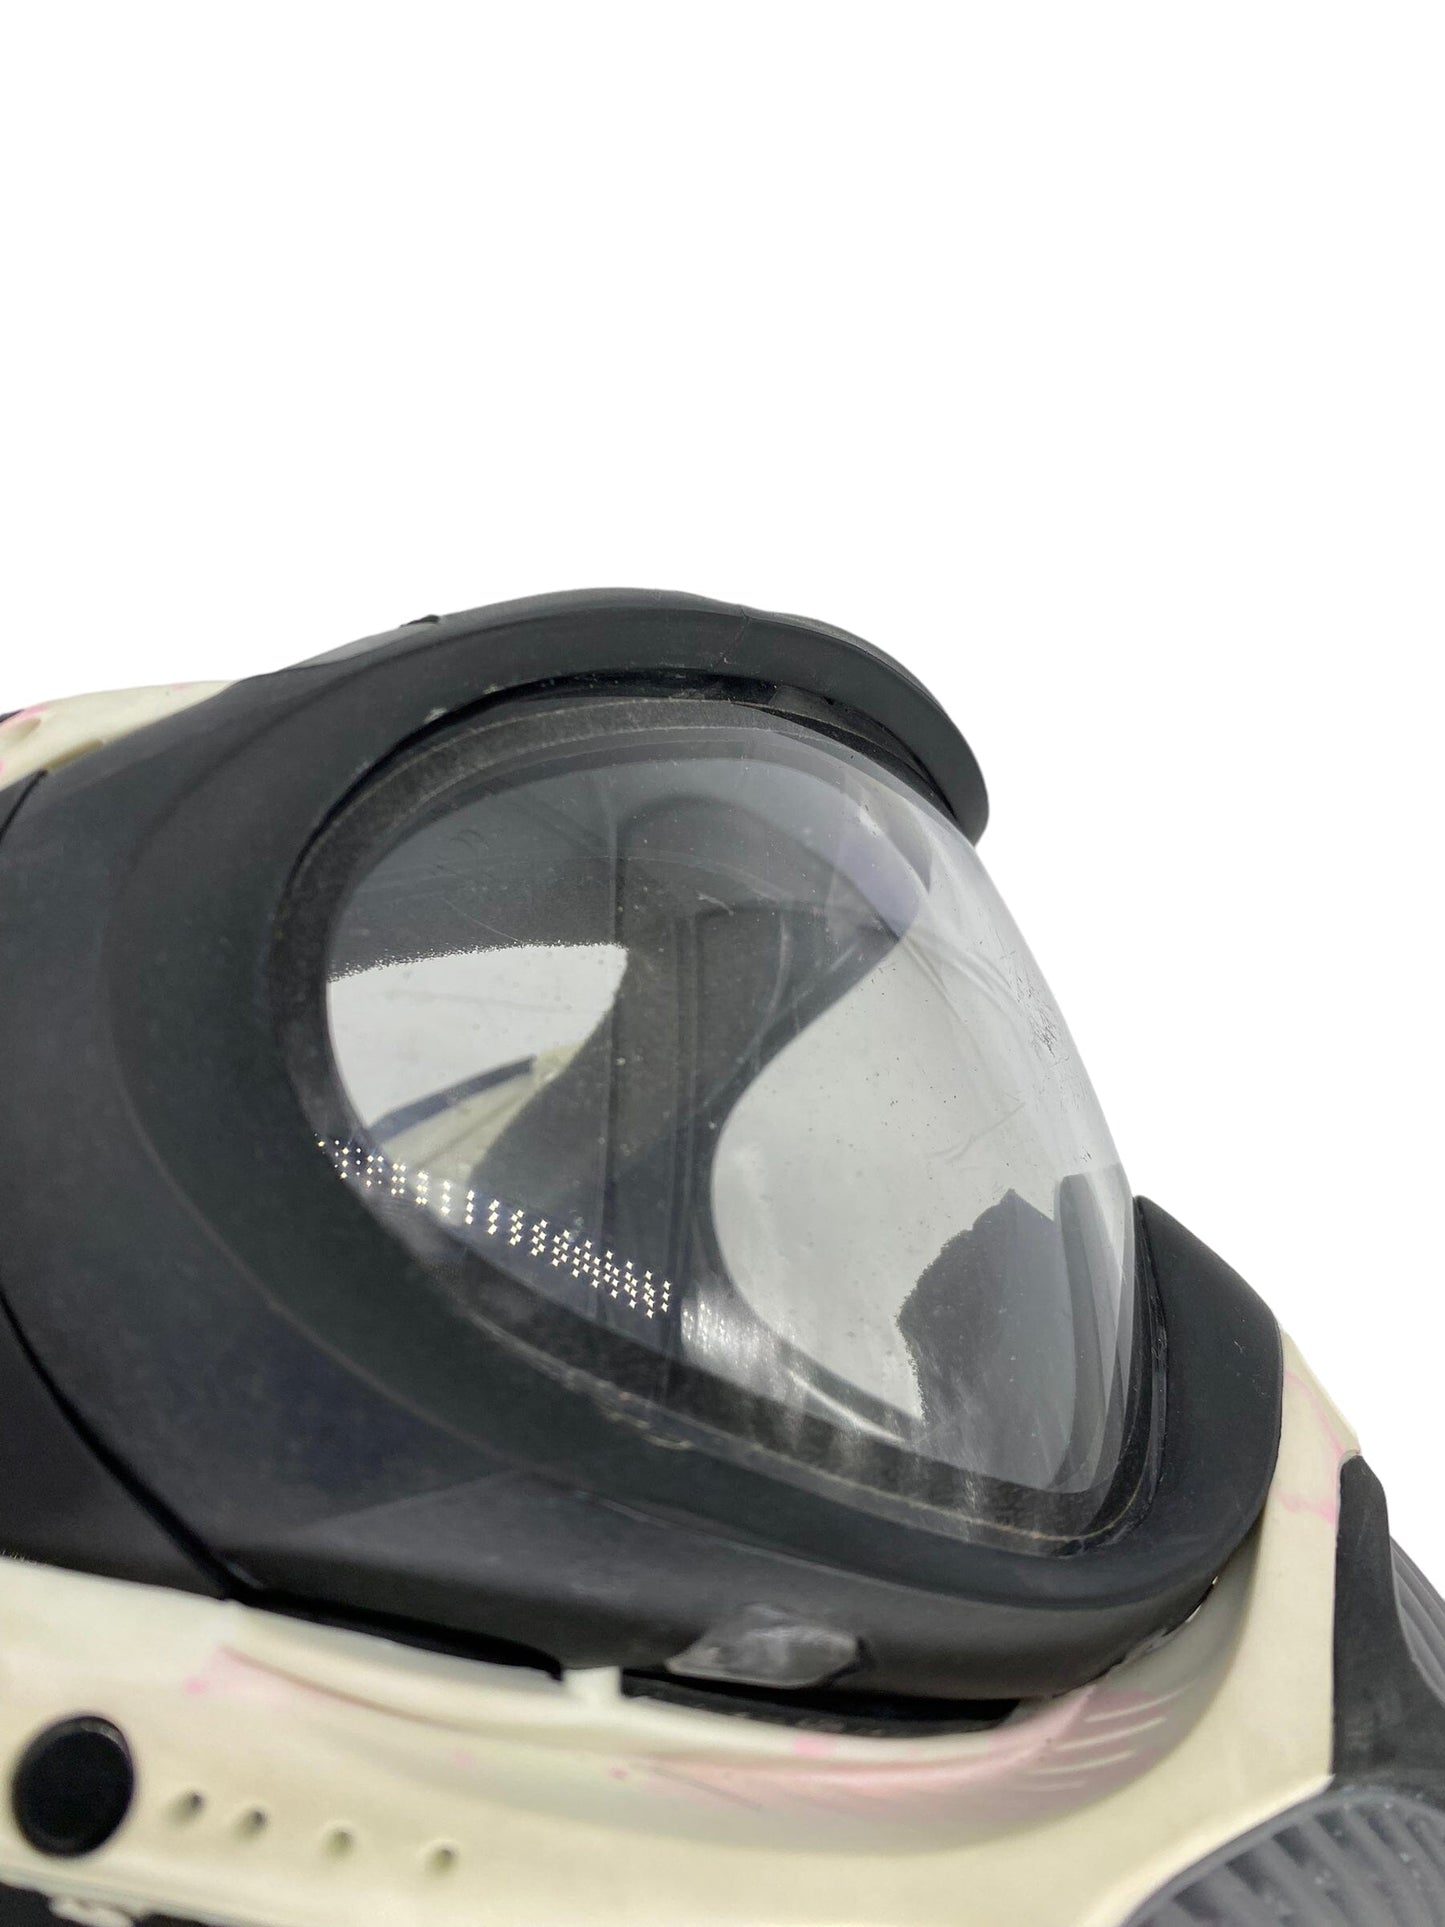 Used Dye i3 Paintball Mask Goggles Paintball Gun from CPXBrosPaintball Buy/Sell/Trade Paintball Markers, Paintball Hoppers, Paintball Masks, and Hormesis Headbands